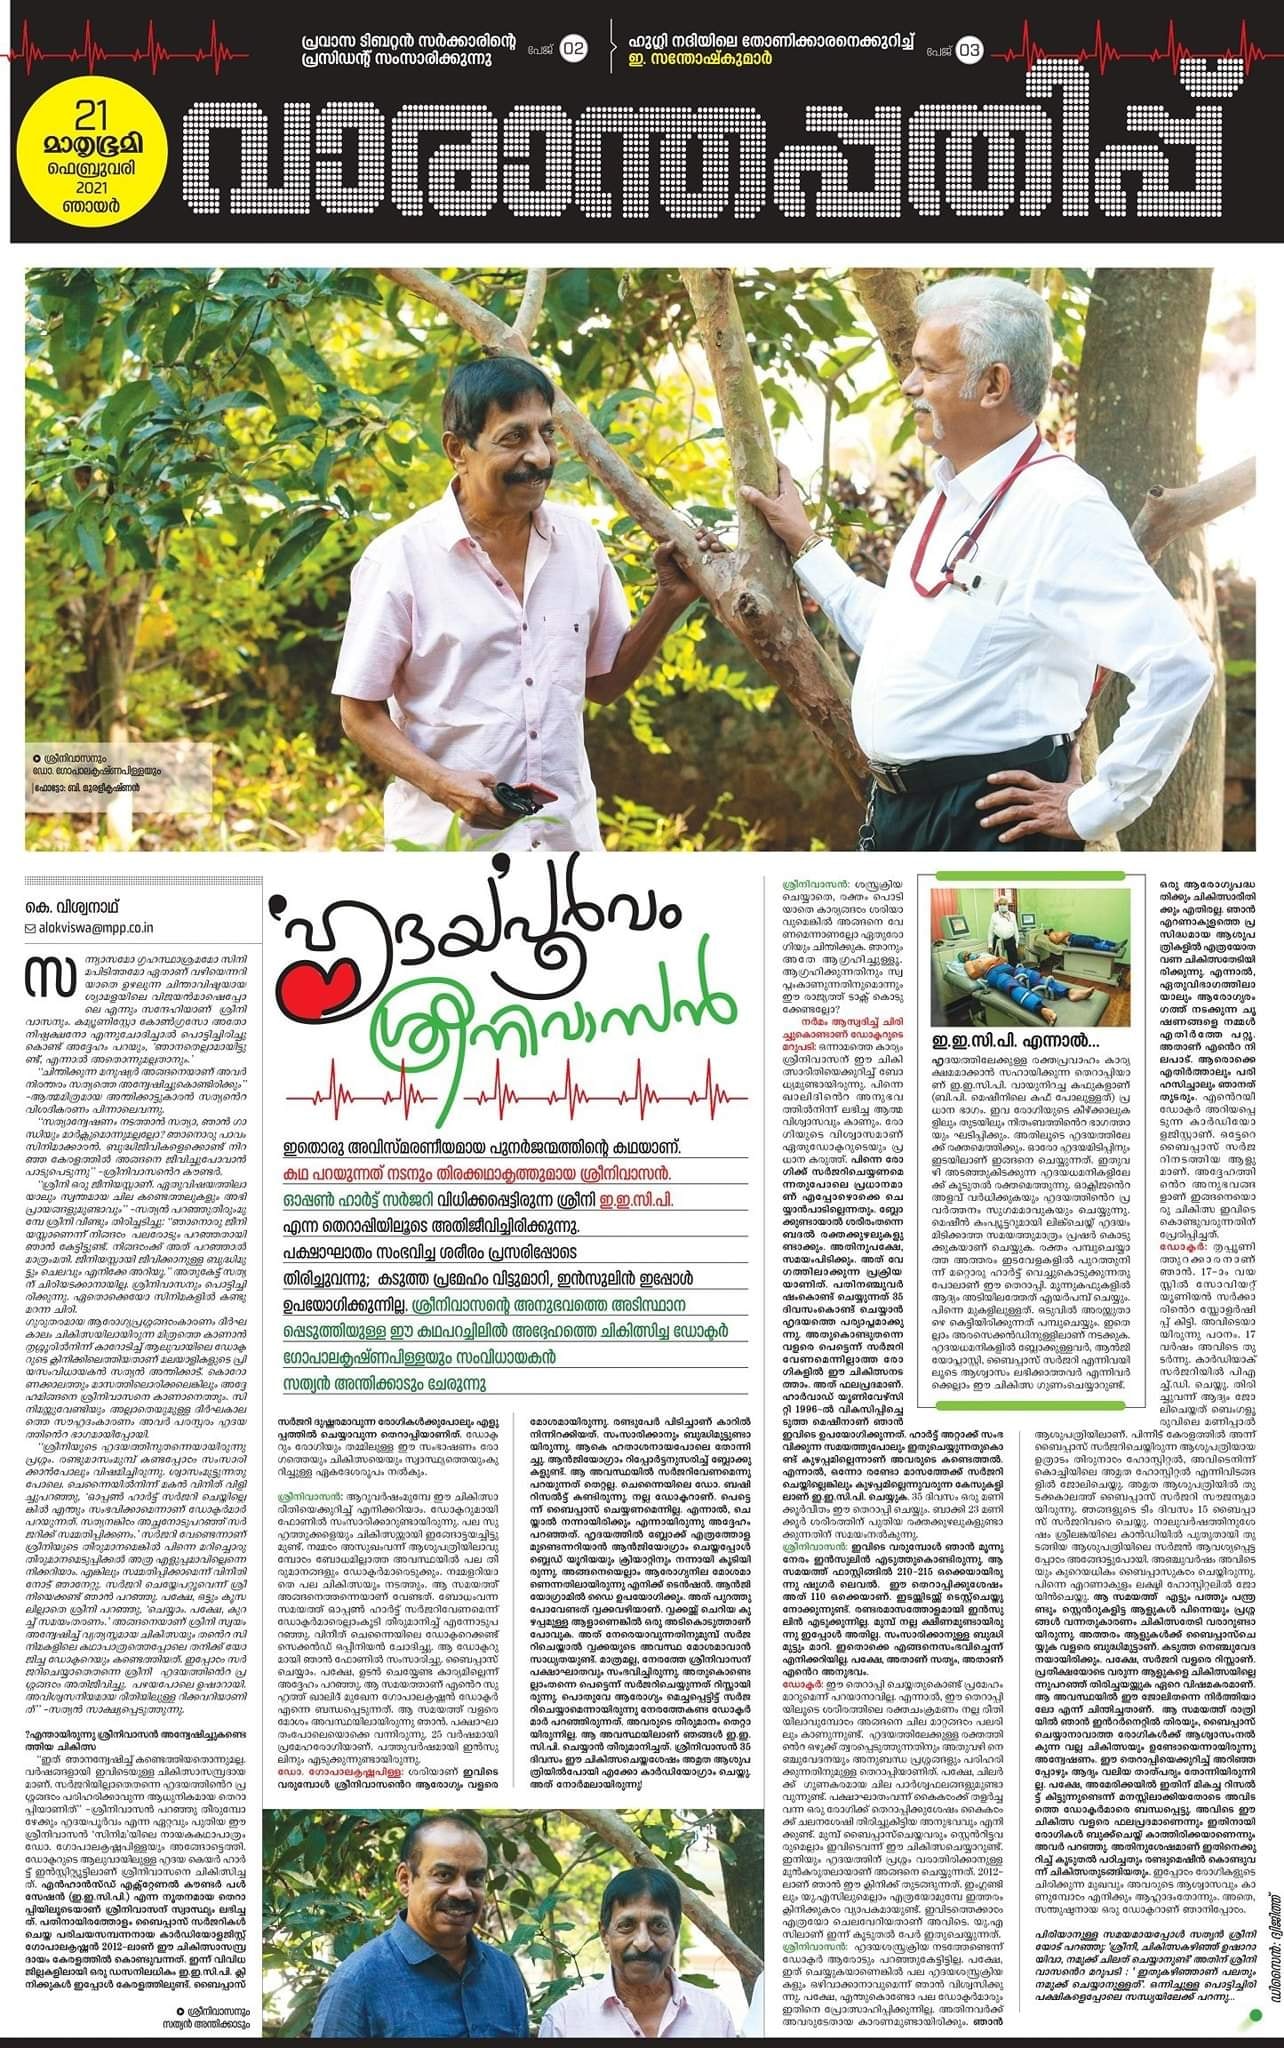 Article published by Sathyan Anthikad and Sreenivasan